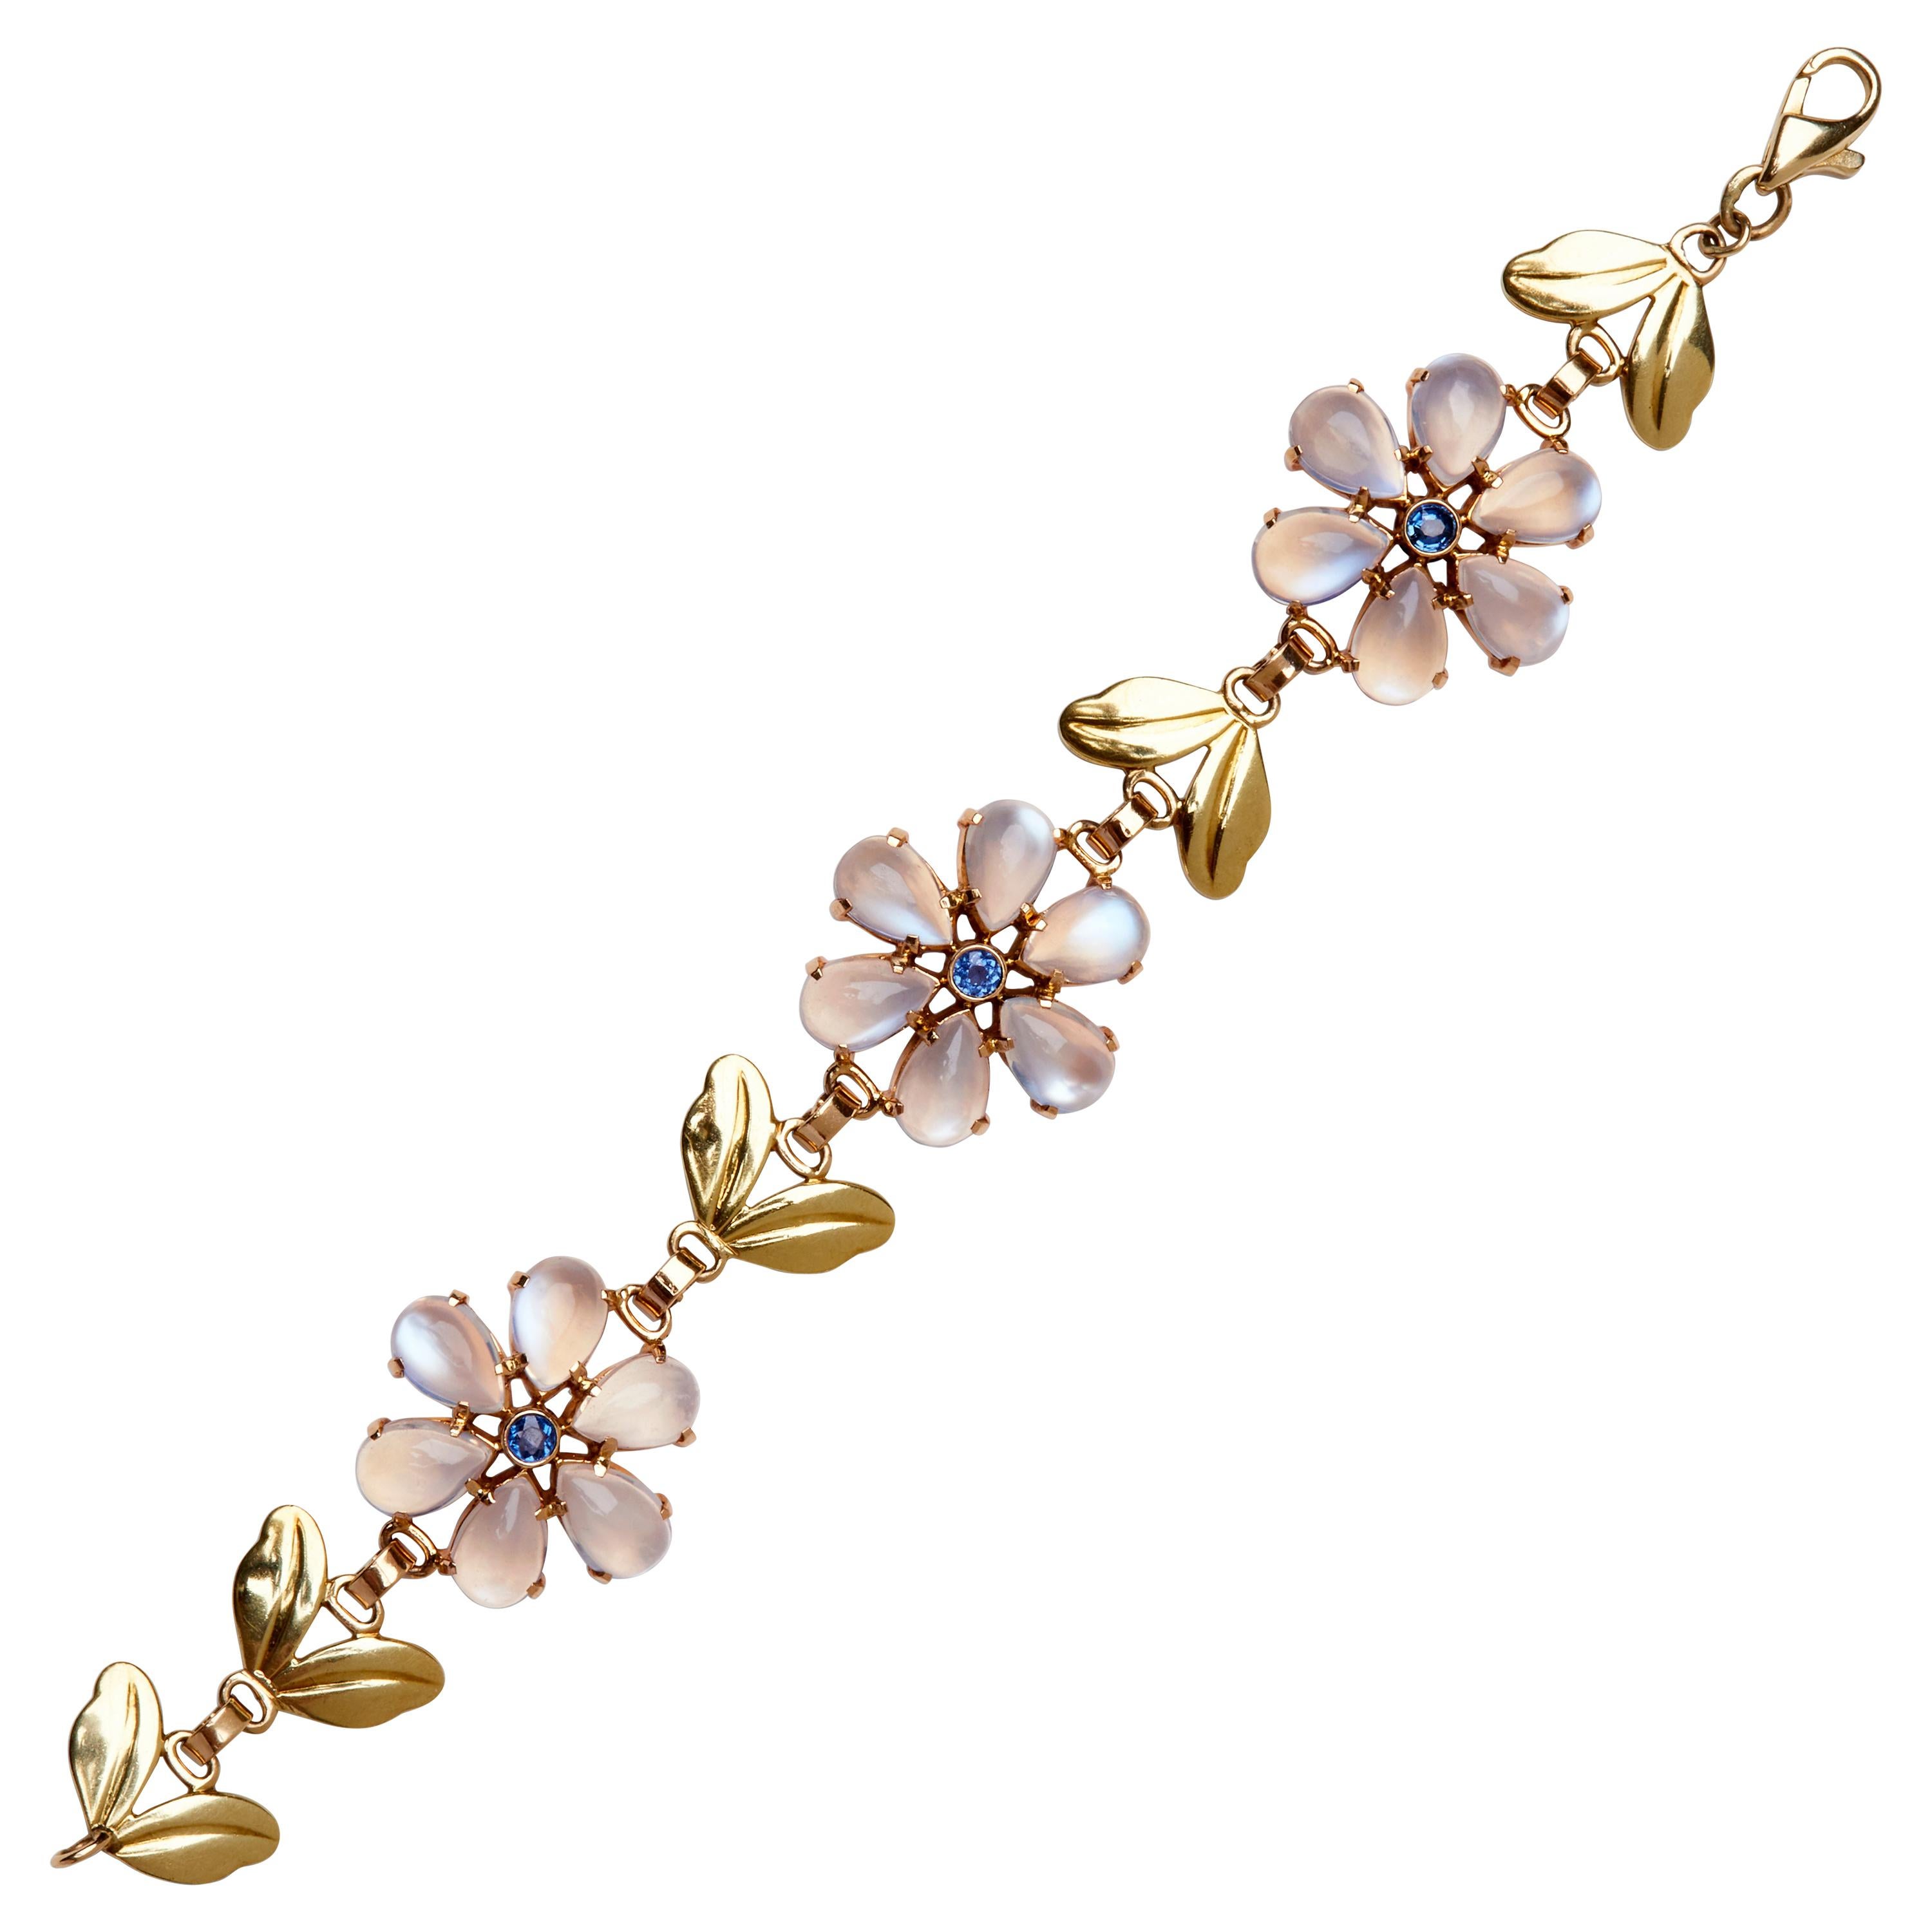 This elegant 1940s bracelet from Tiffany & Co. features three floral motif stations separated by leaf-shaped links. Each flower is composed of luminous cabochon moonstone petals accented by round-cut blue sapphires.

7.25” long by 1”